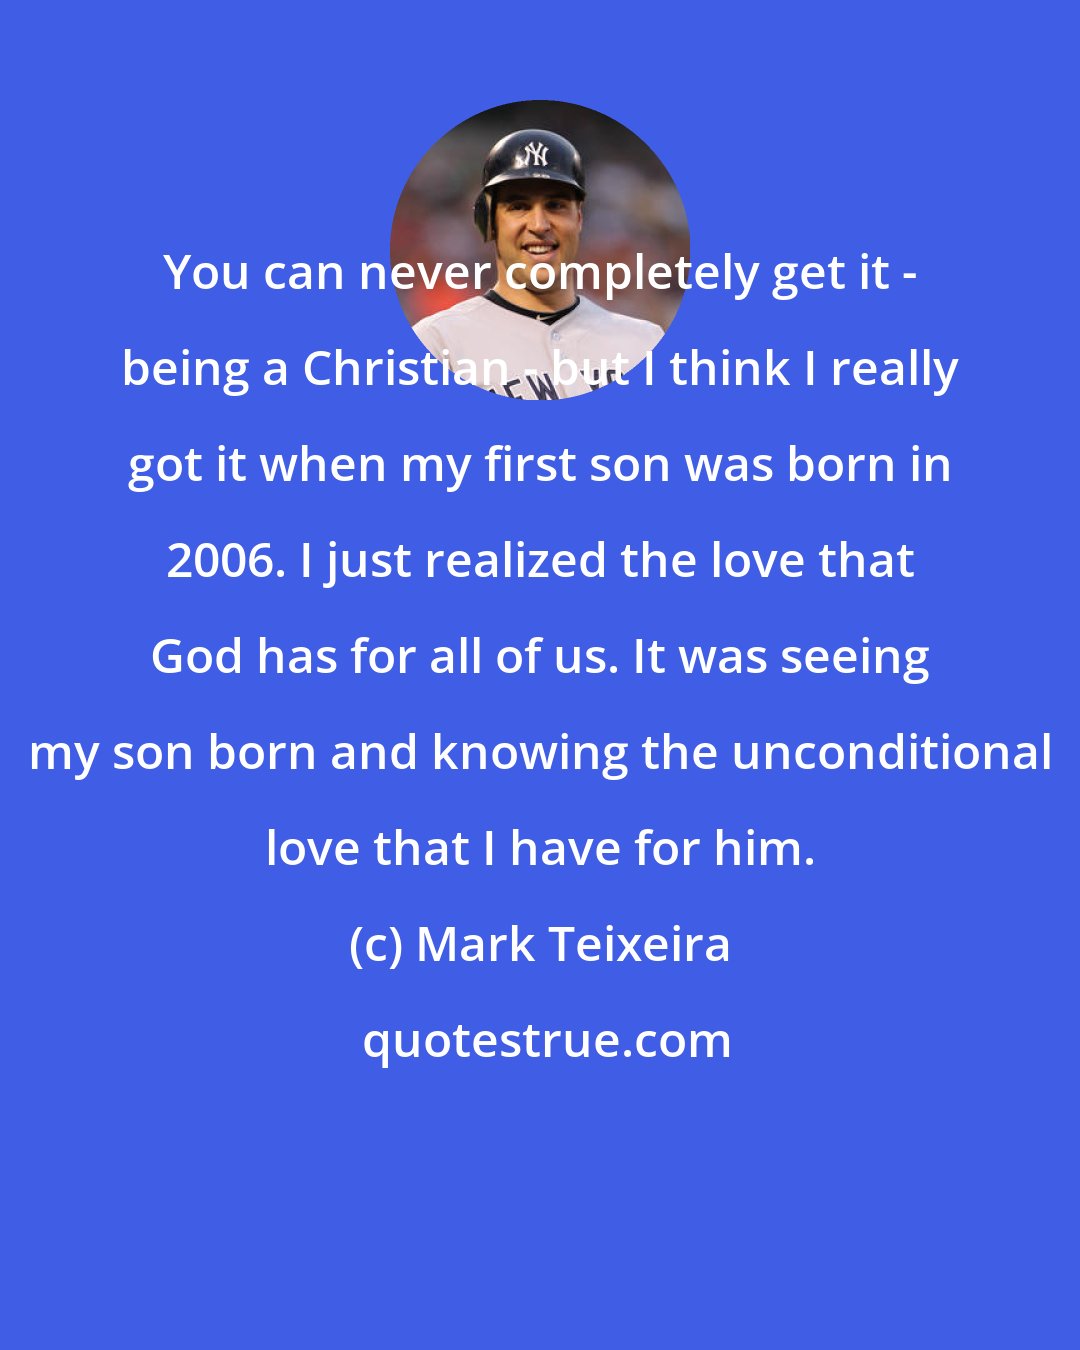 Mark Teixeira: You can never completely get it - being a Christian - but I think I really got it when my first son was born in 2006. I just realized the love that God has for all of us. It was seeing my son born and knowing the unconditional love that I have for him.